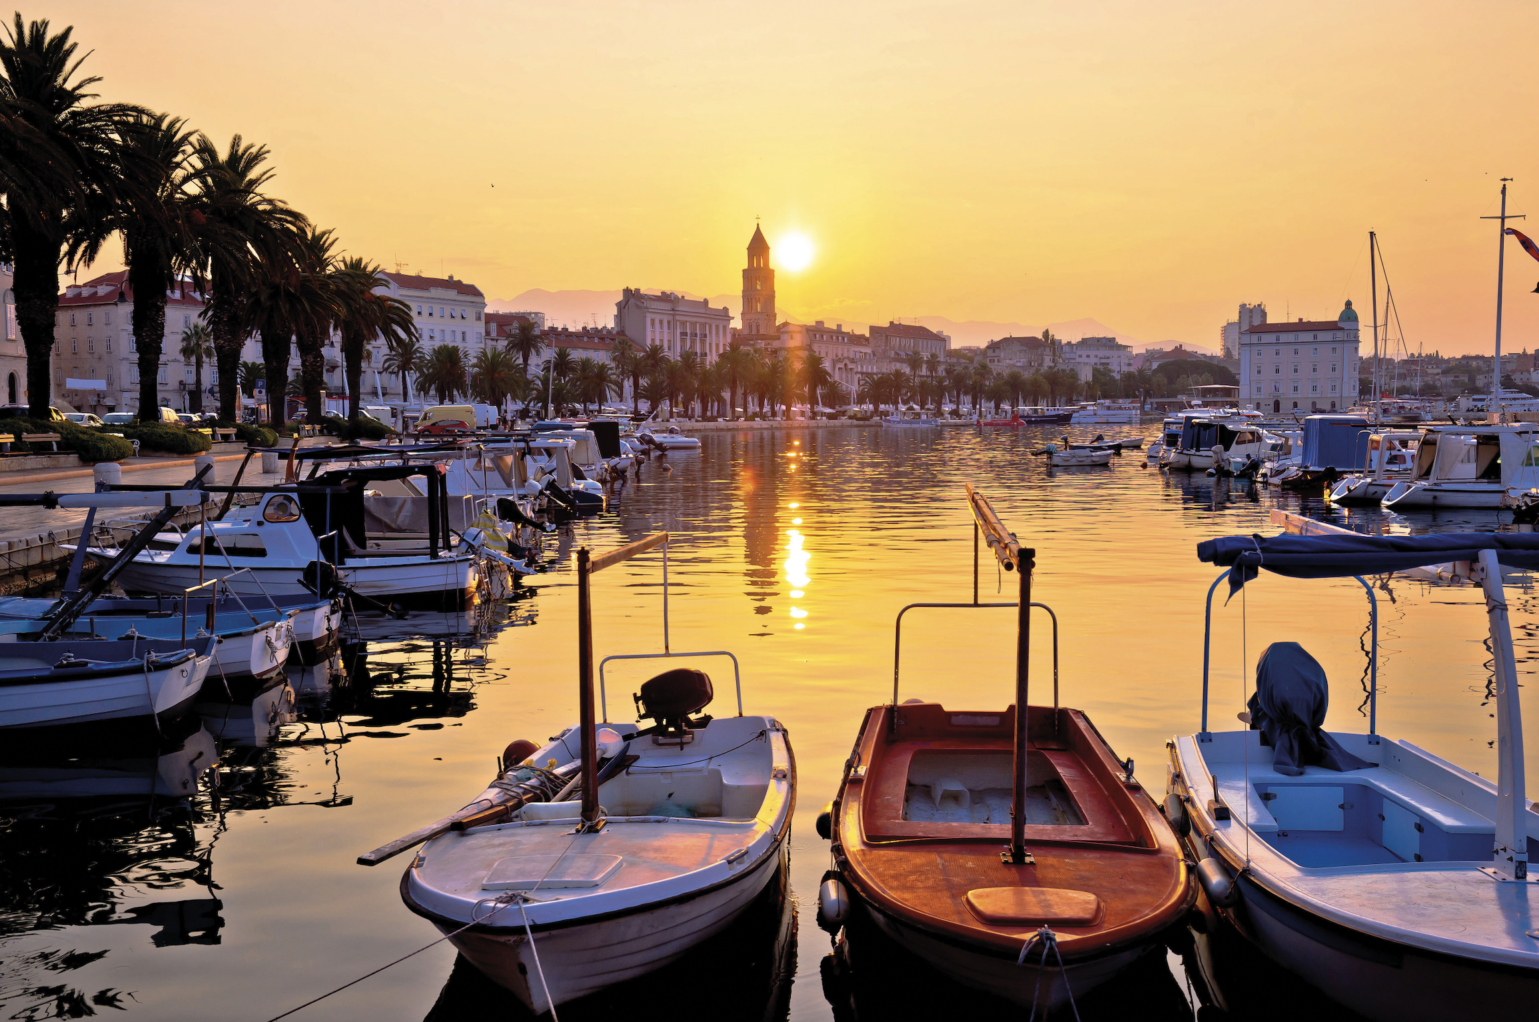 Croatia is a stunning destination on Emerald Yacht's itineraries